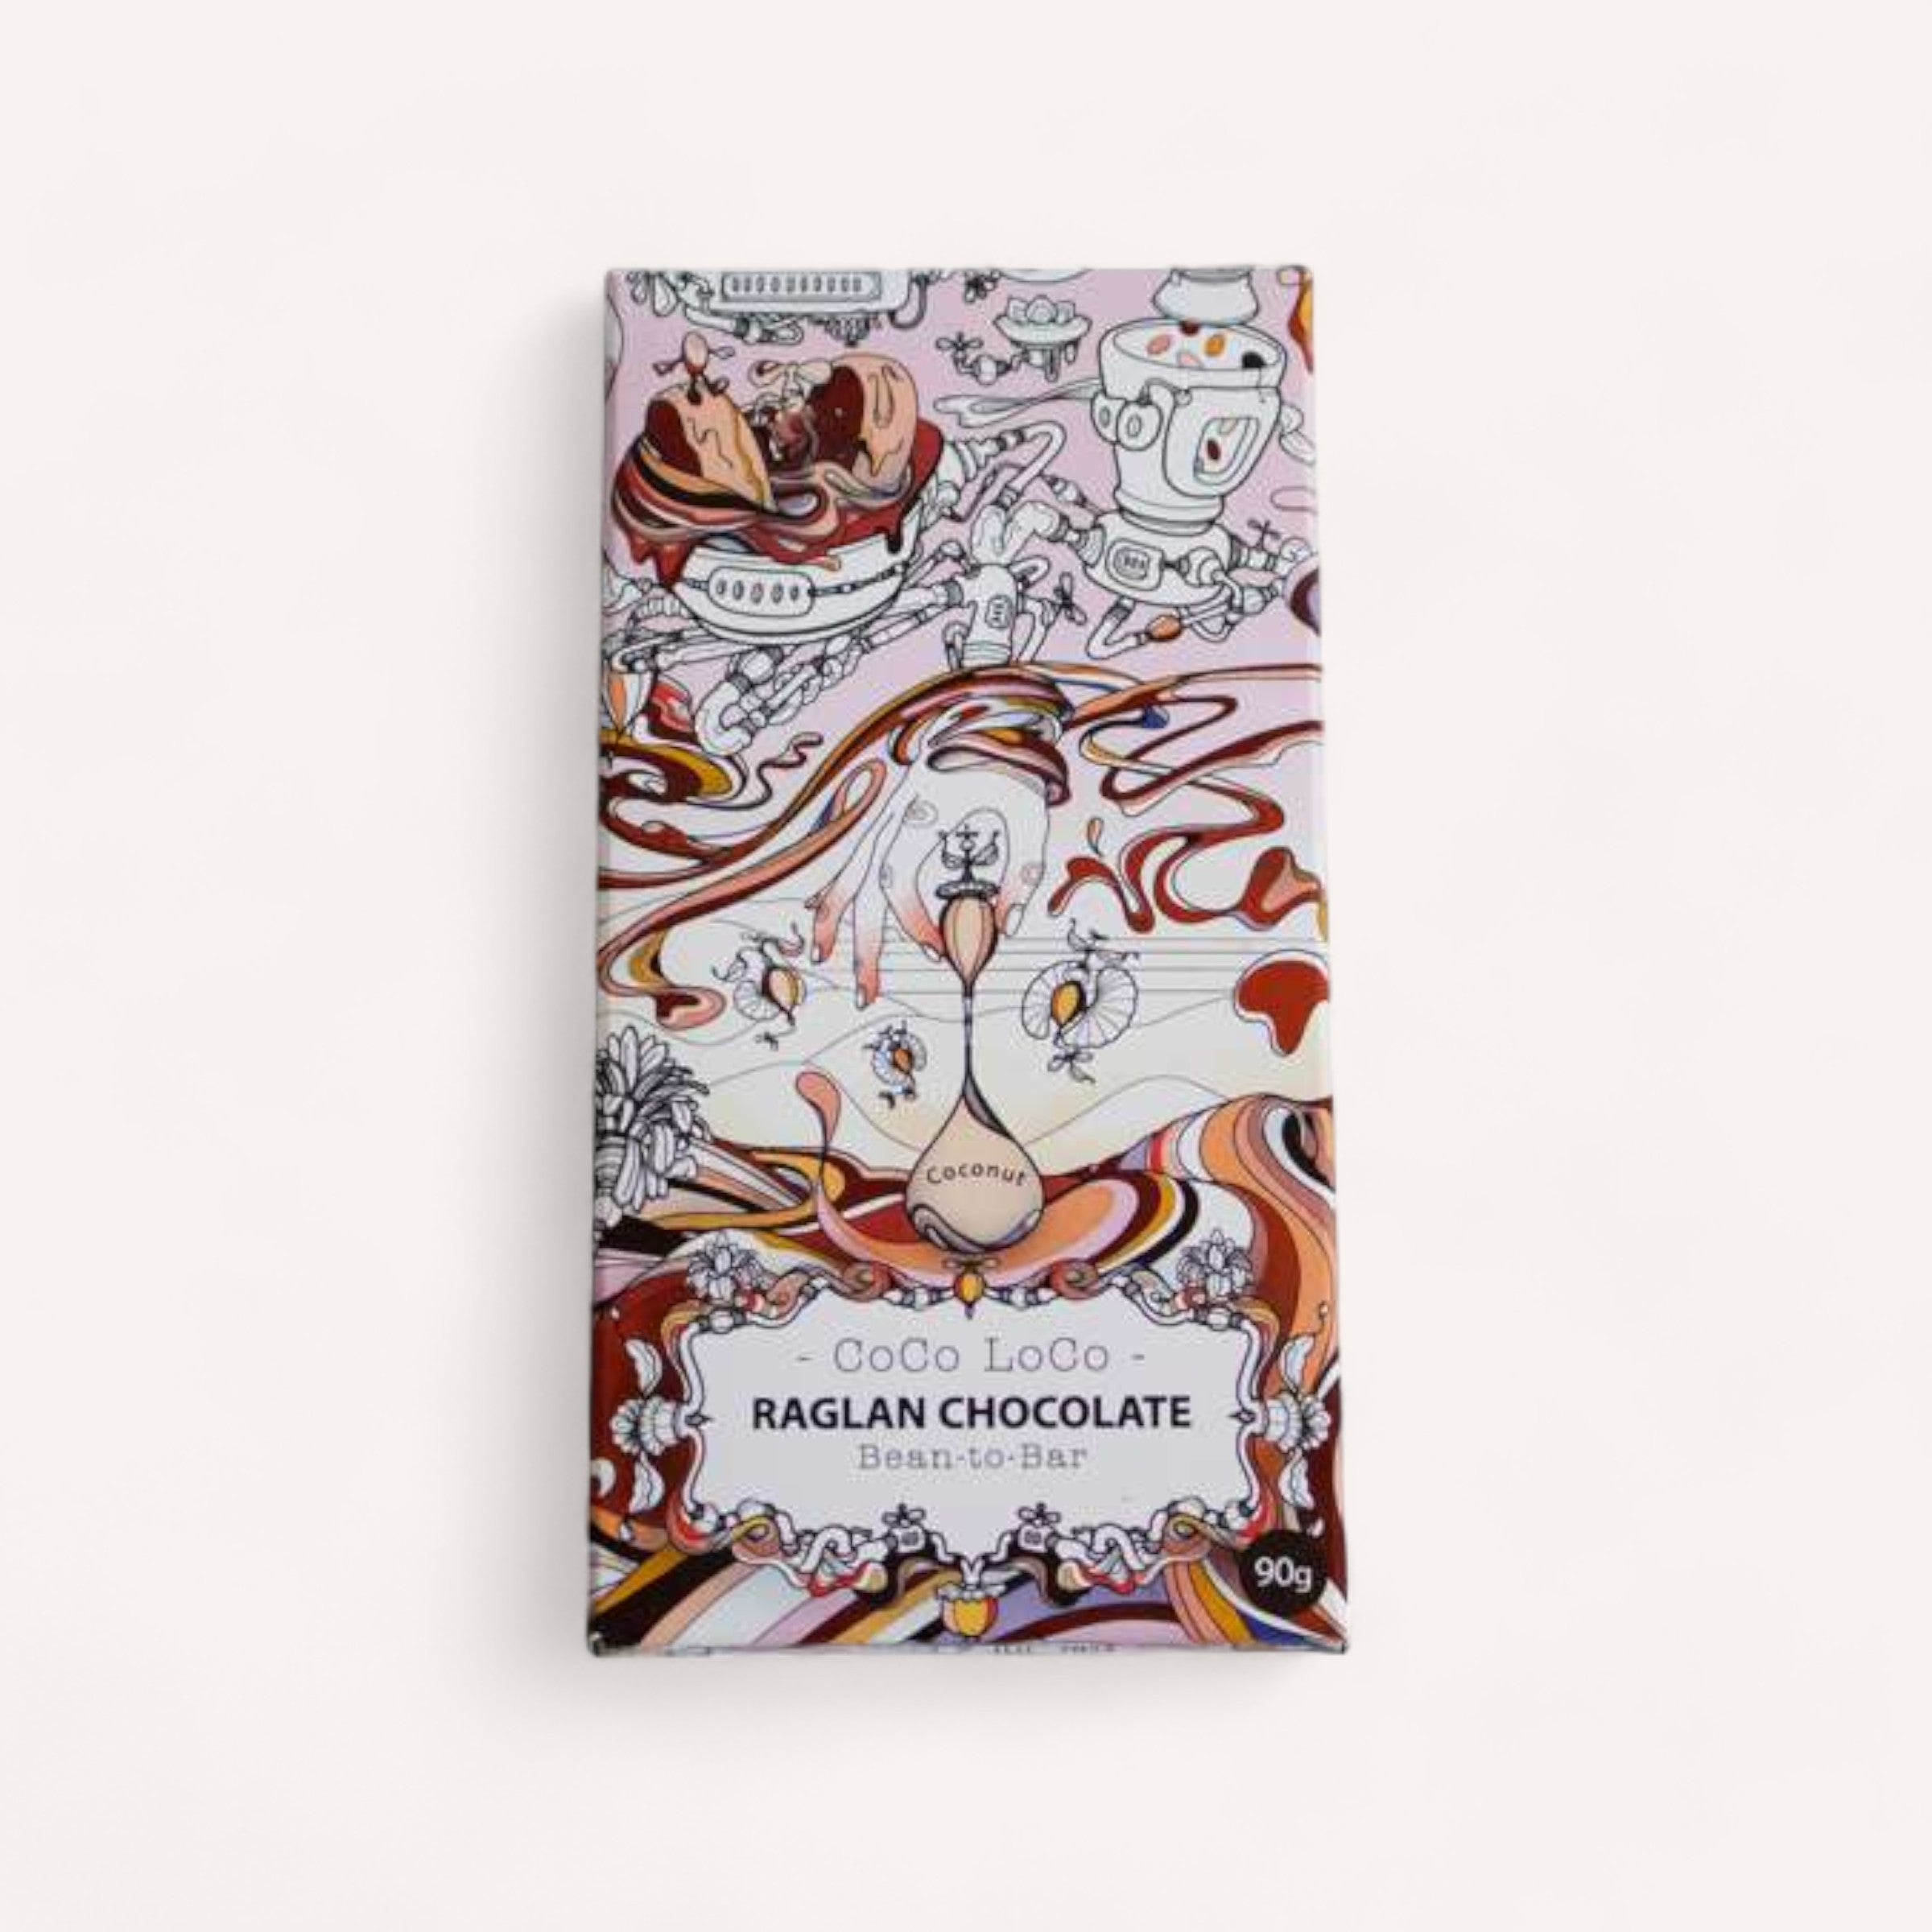 Abstract and colorful artwork on a CoCo LoCo by Raglan Chocolate wrapper.